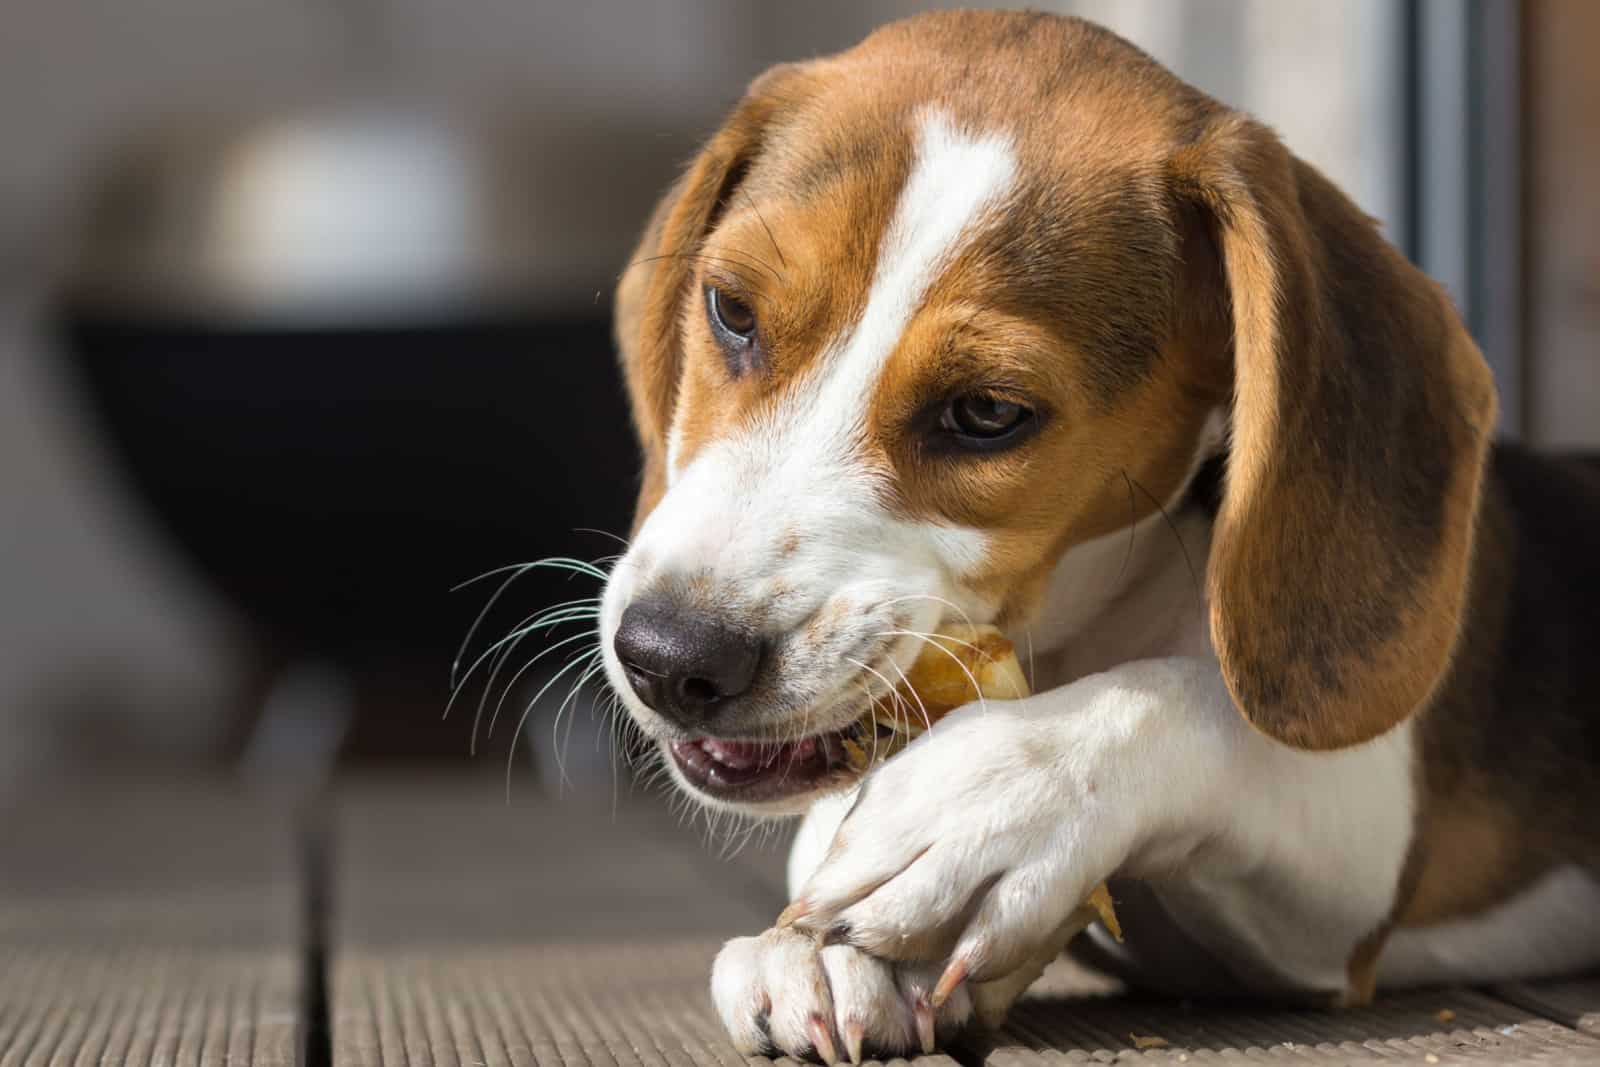 Young beagle chewing on a treat